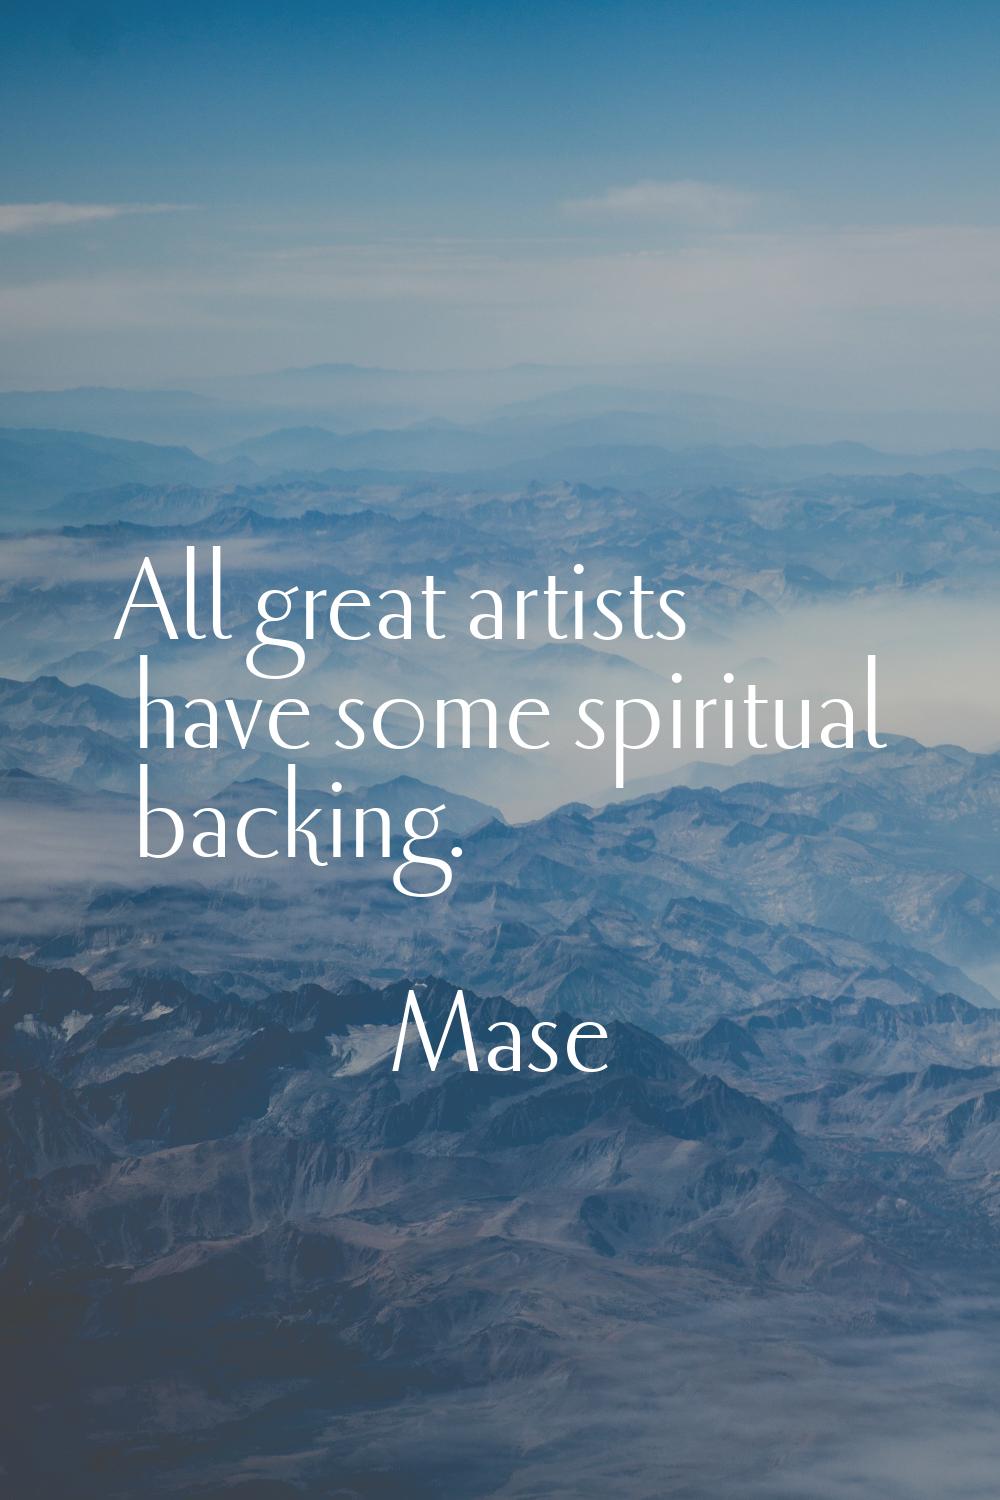 All great artists have some spiritual backing.